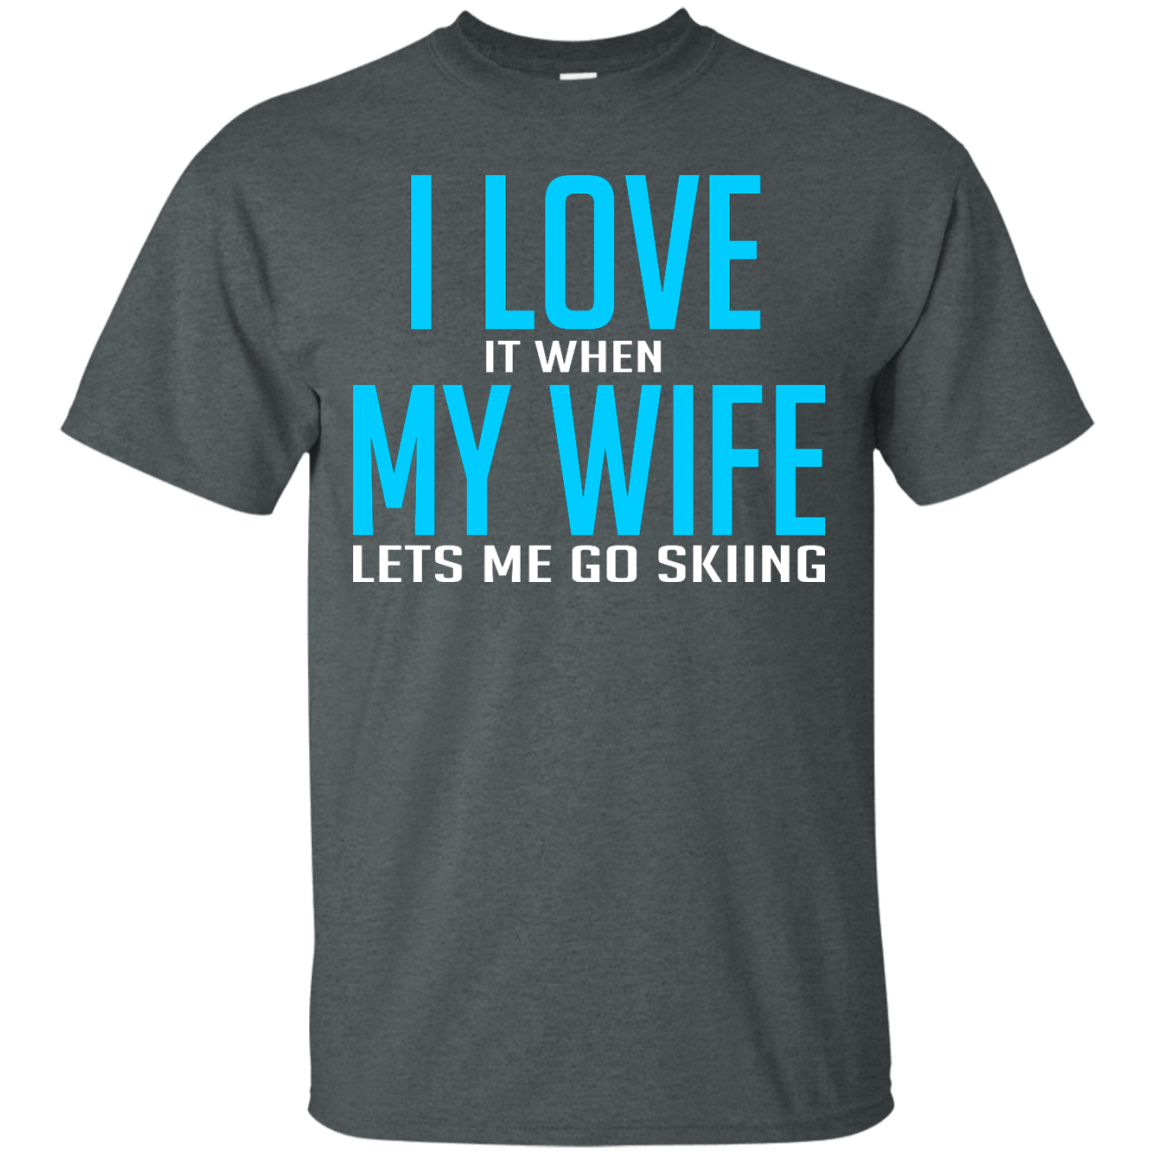 I Love It When My Wife Lets Me Go Skiing Tees and V-neck - Powderaddicts